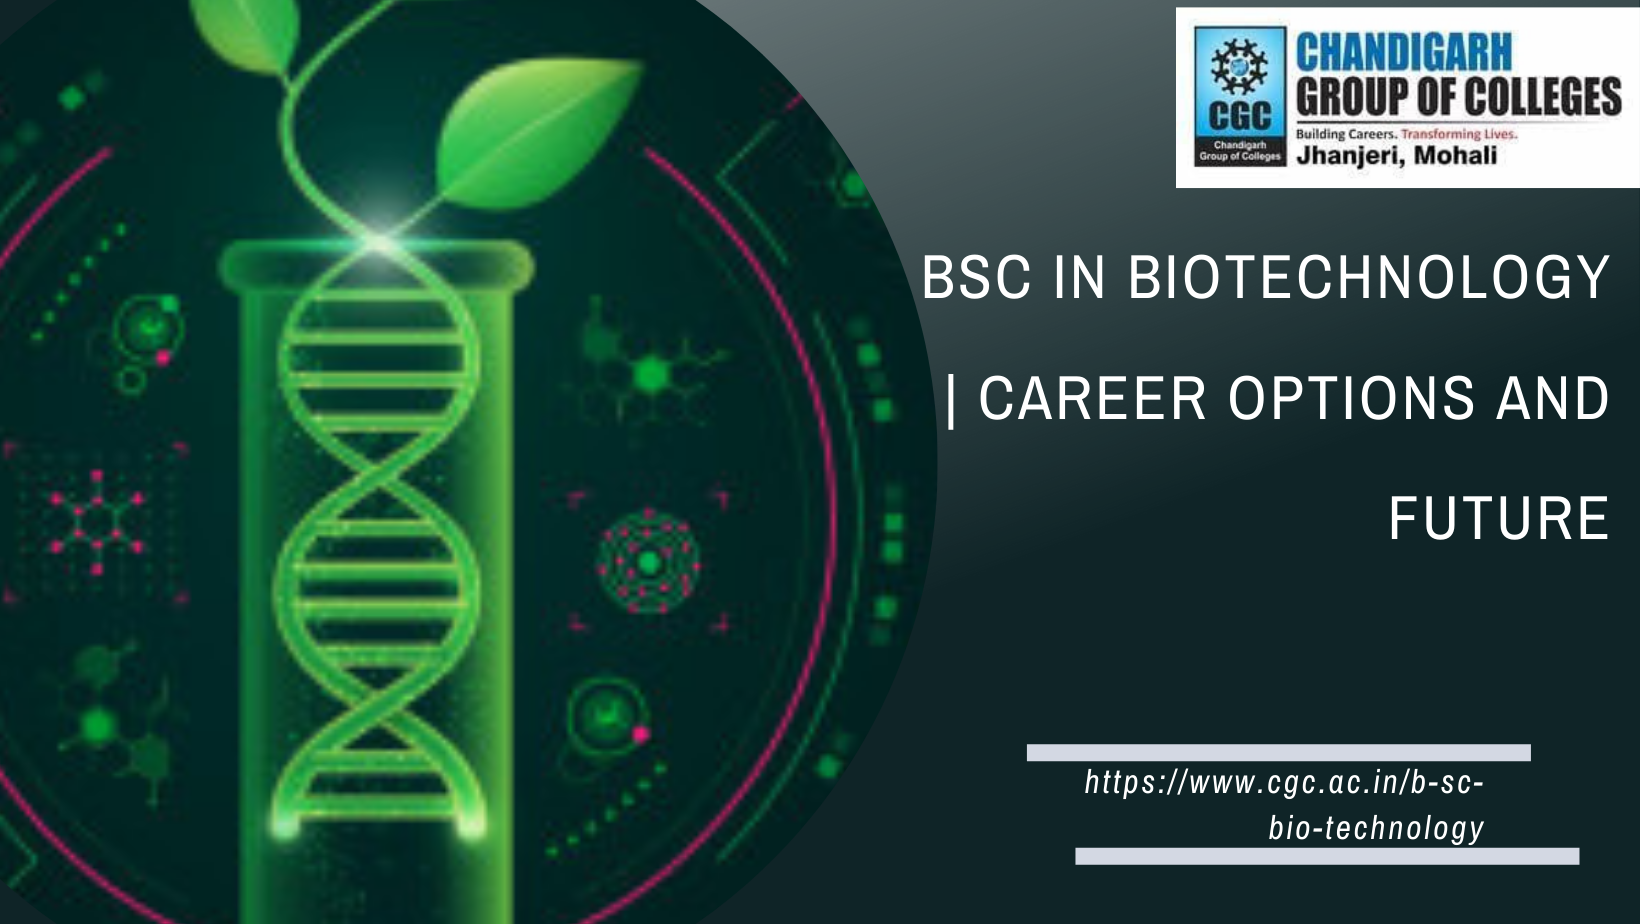 BSc in Biotechnology - Chandigarh Group of Colleges Jhanjeri